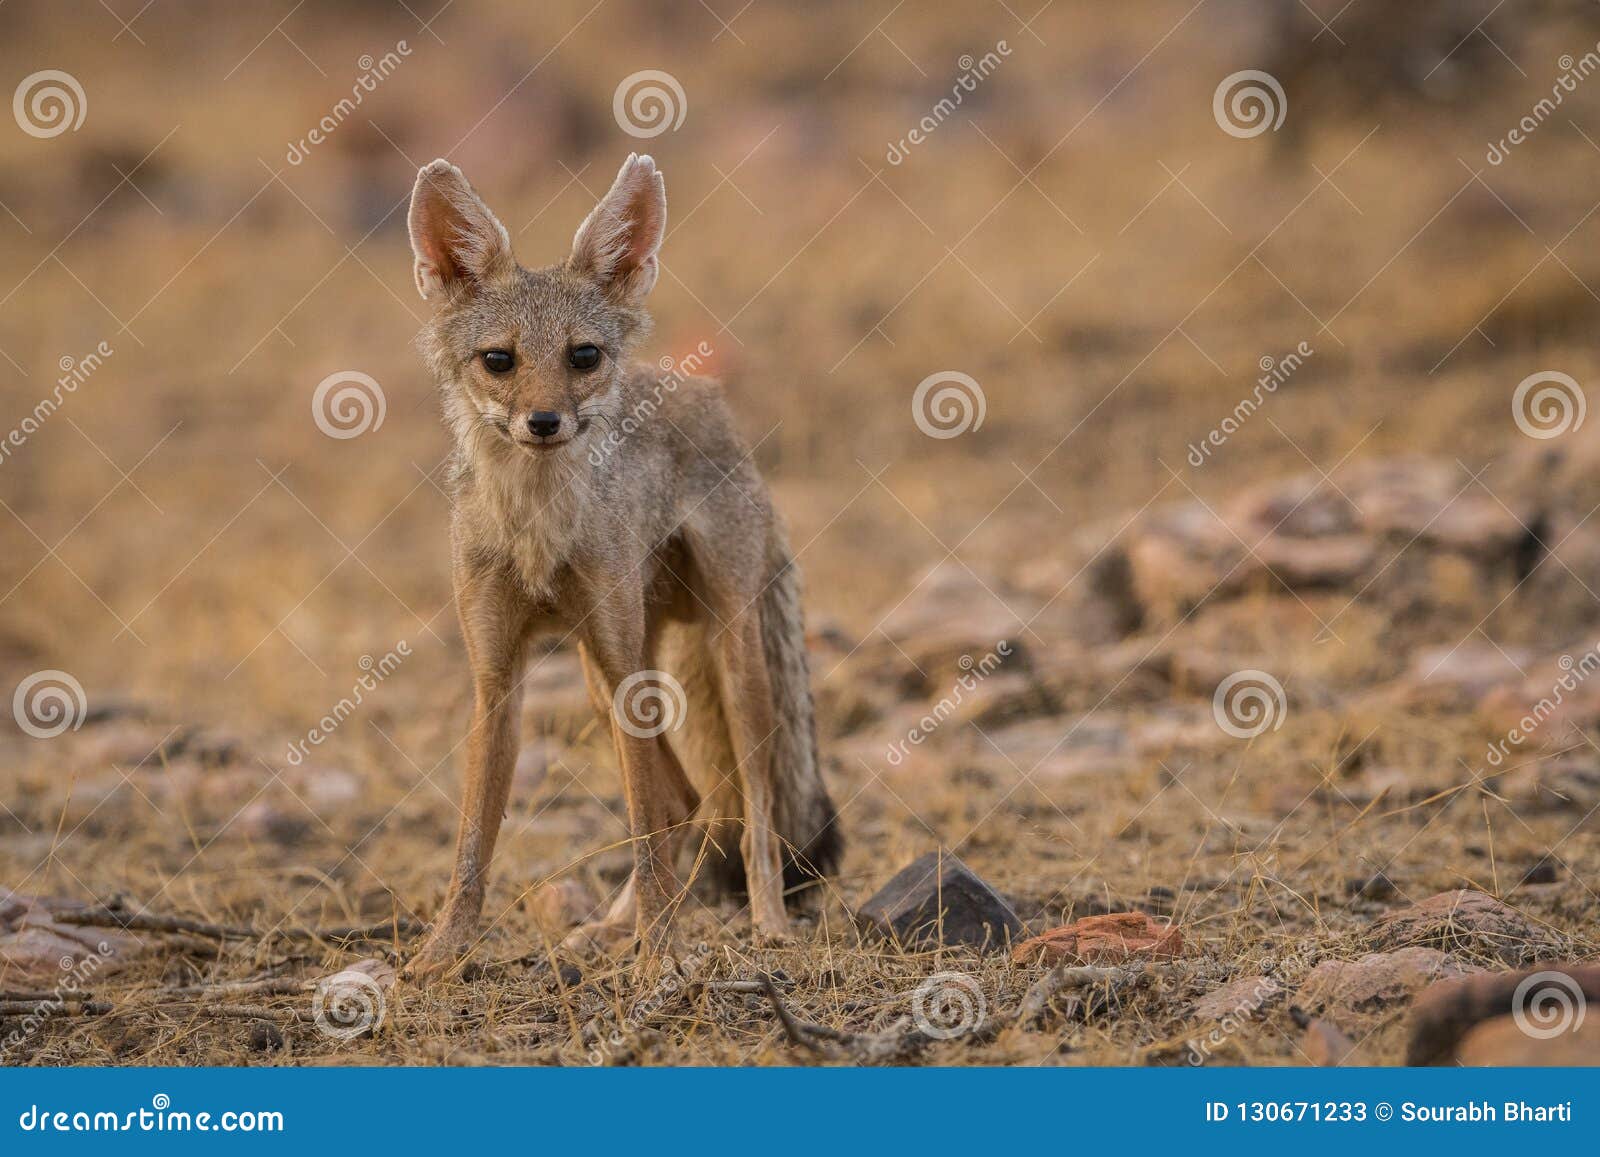 A Bold Indian Fox Pup Vulpes Bengalensis Stock Image - Image of background,  indian: 130671233